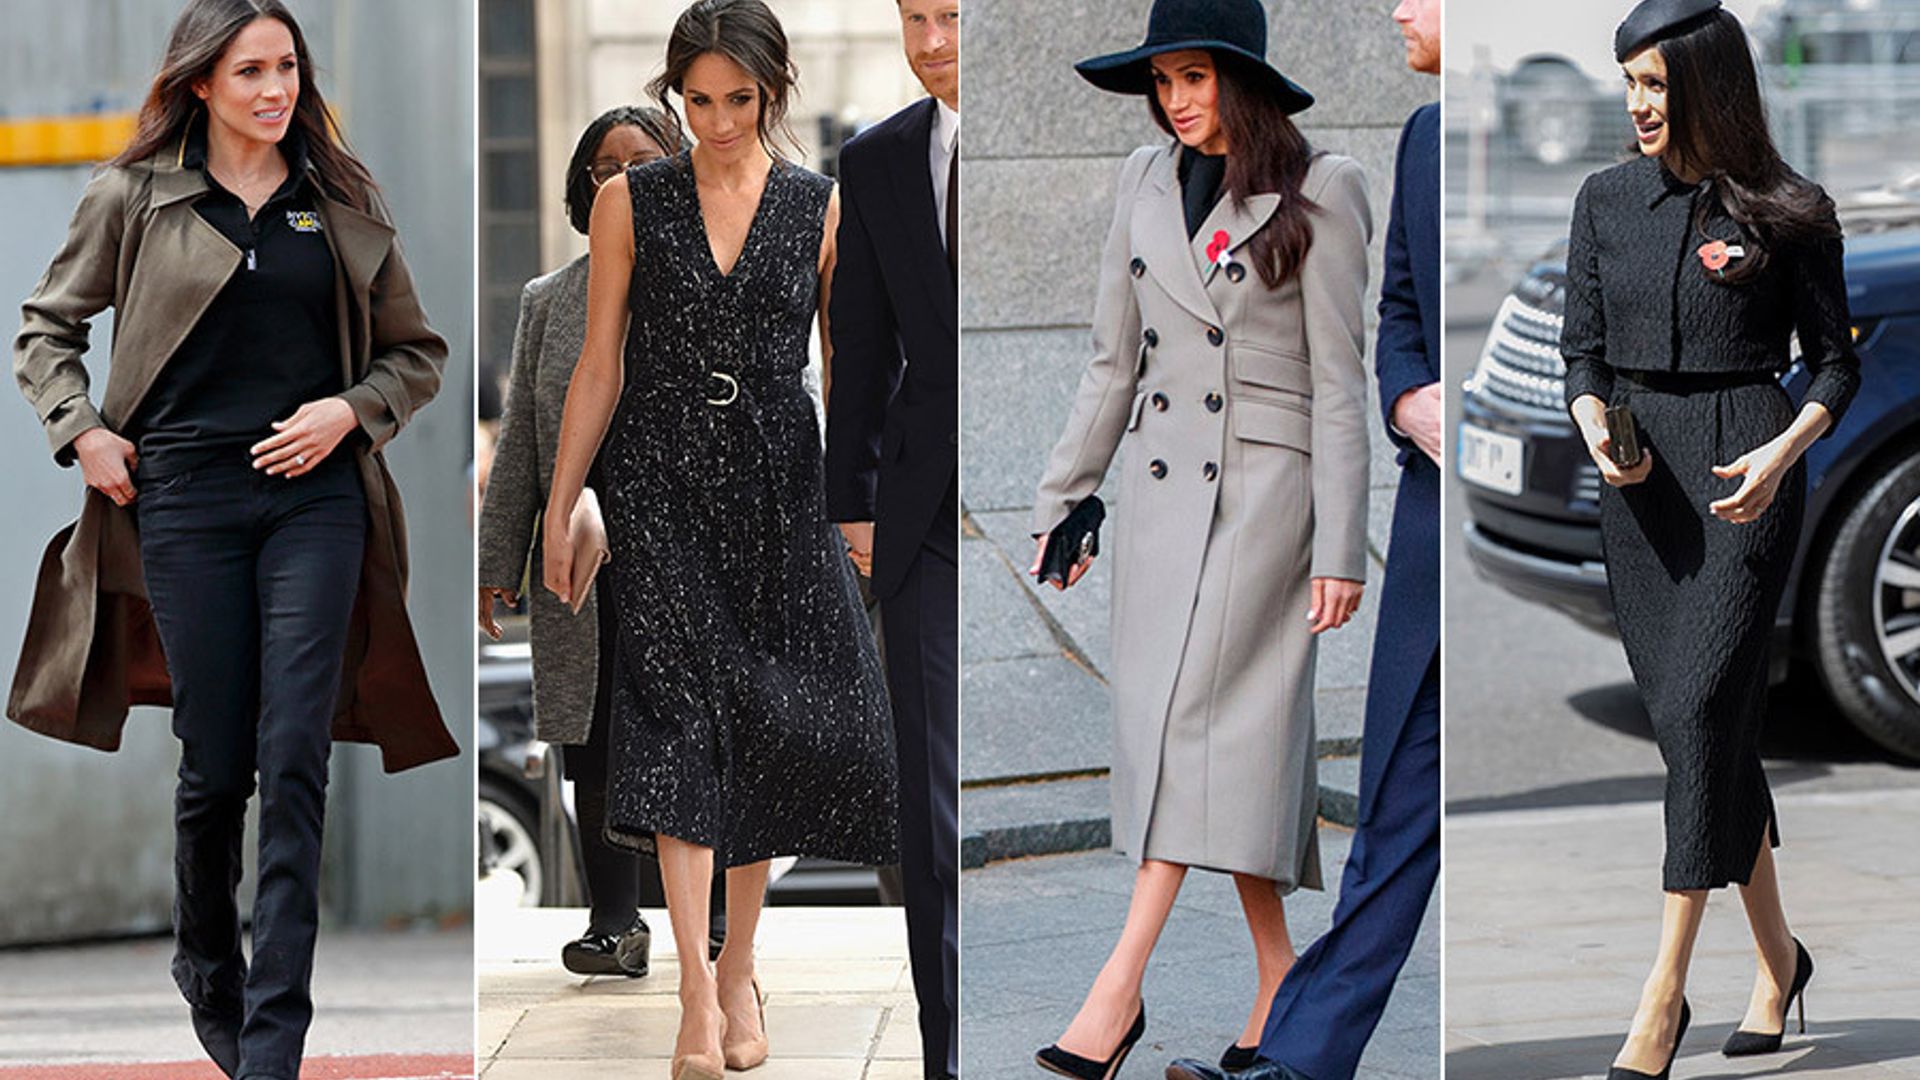 Royal style: The best-dressed royalty of April 2018